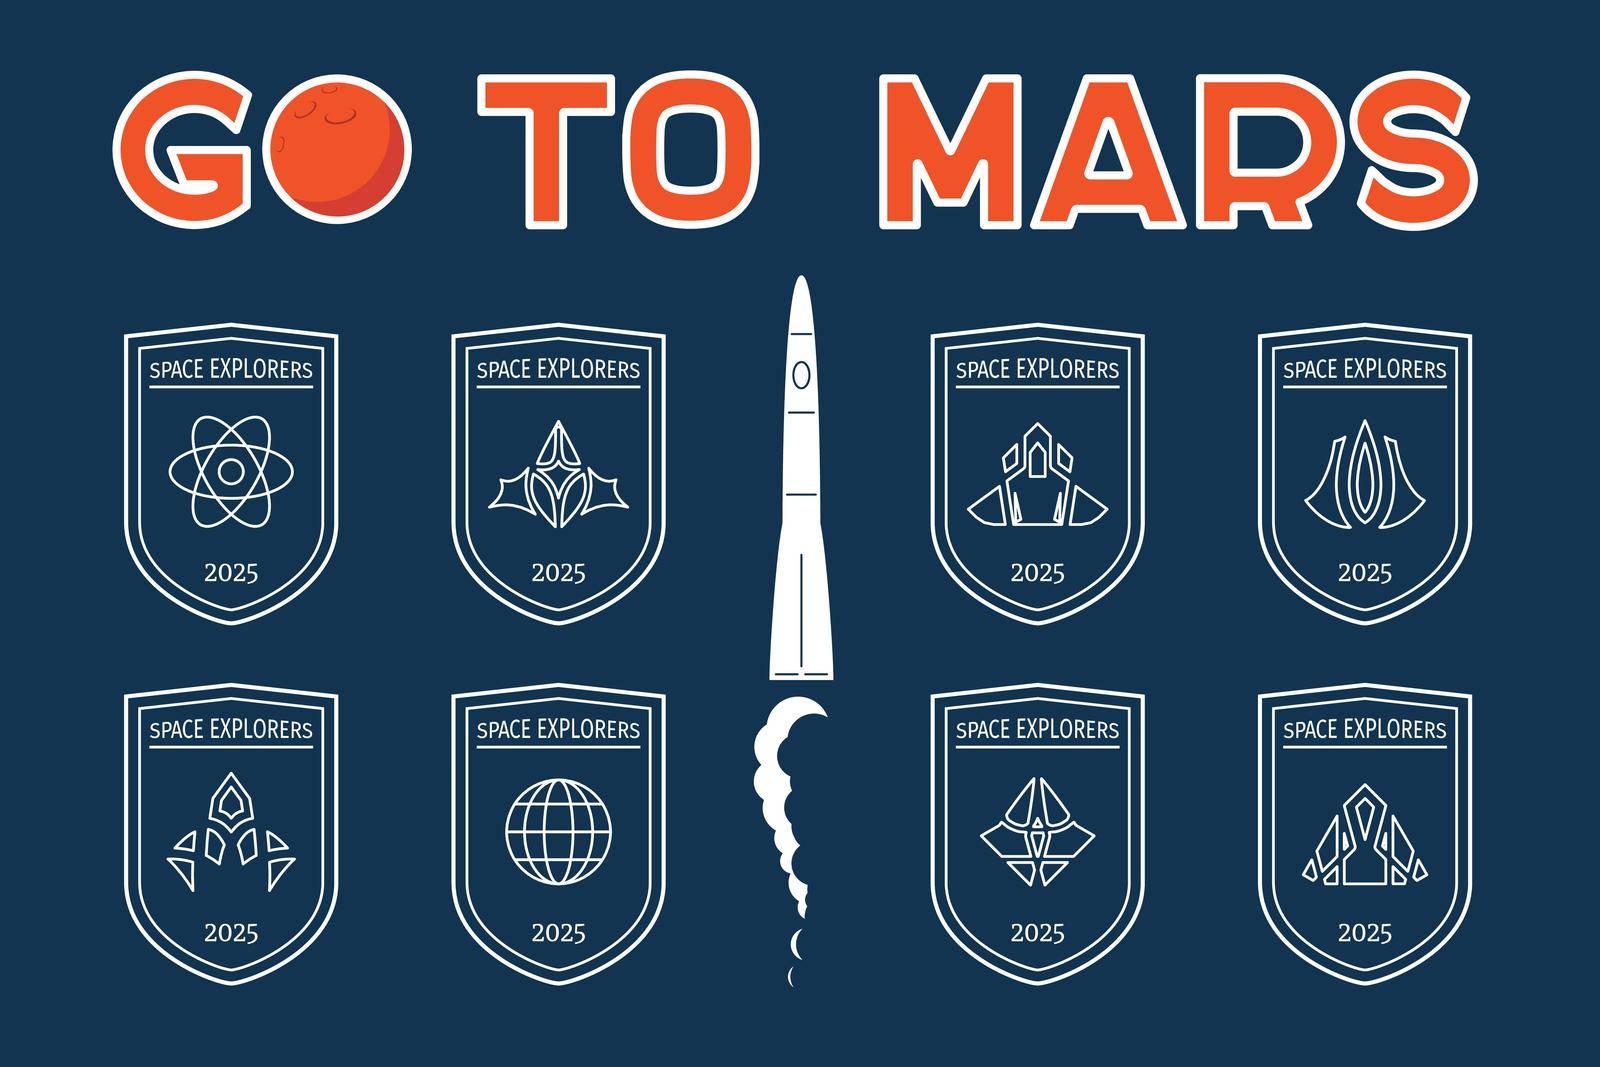 Badges set with spacecrafts. Vector design template for Mars mission, exploration, promo events, games or books